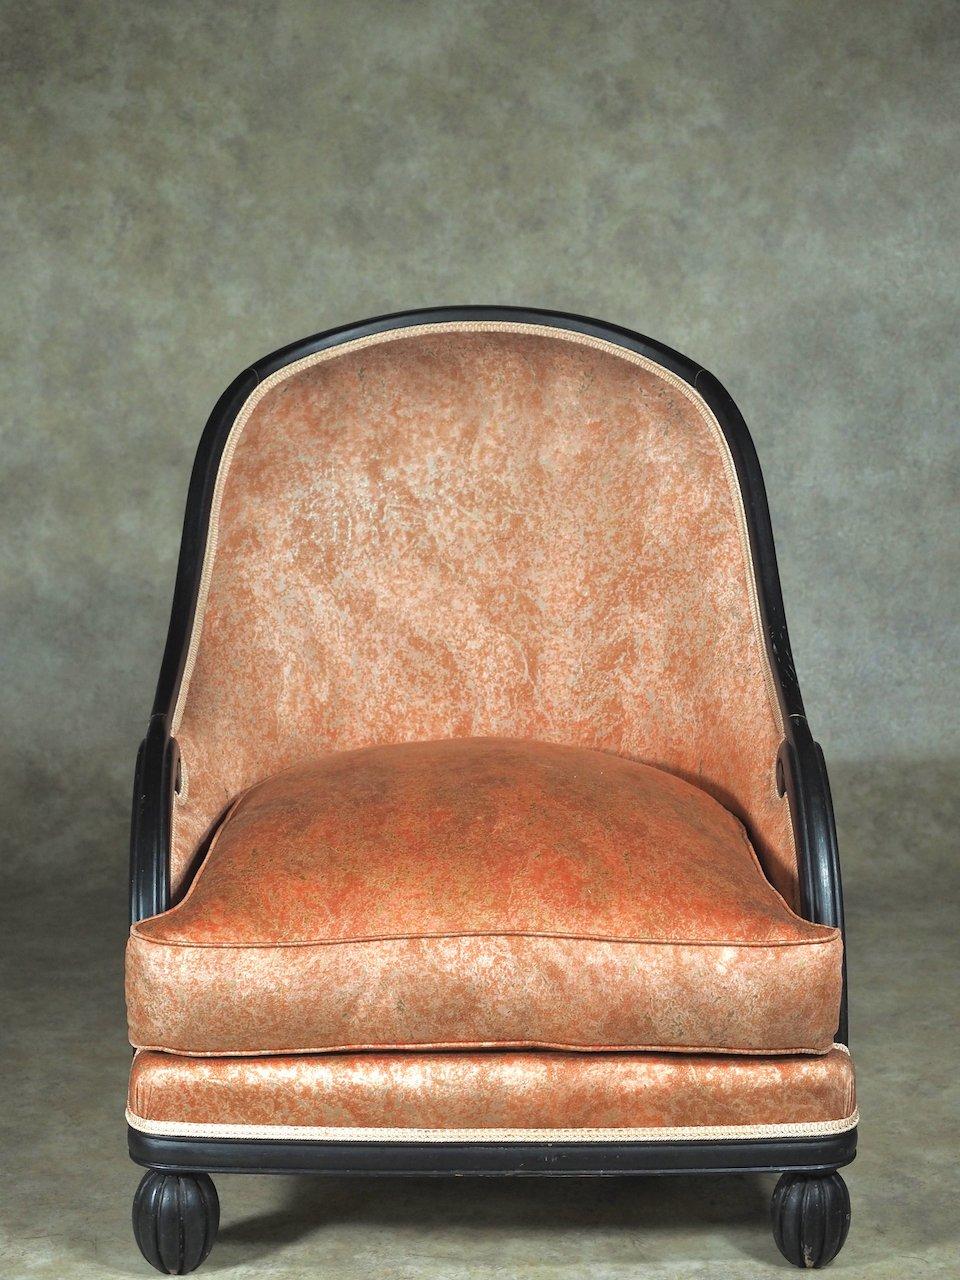 Classic French Art Deco swooping round-backed club/arm/relaxing chair by Maurice Dufrene, circa 1925. 25” wide x 29” deep x 32” high.

MAURICE DUFRENE

(1876 - 1955)
One of the premiere French designers of the 20th Century, Maurice Dufrene was